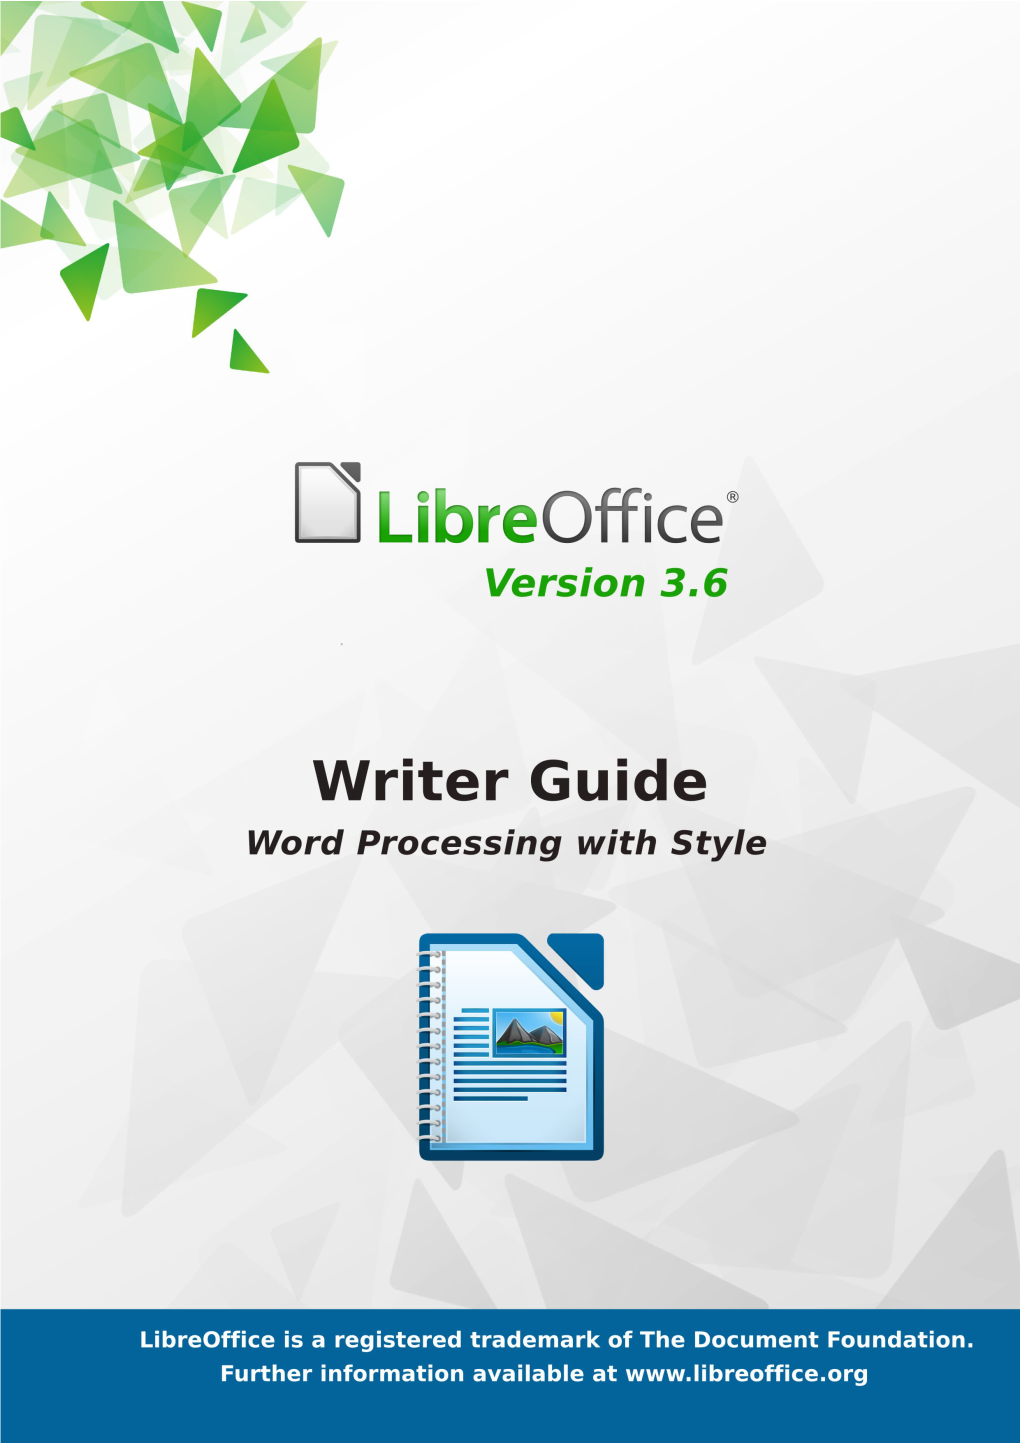 Libreoffice 3.6 Writer Guide